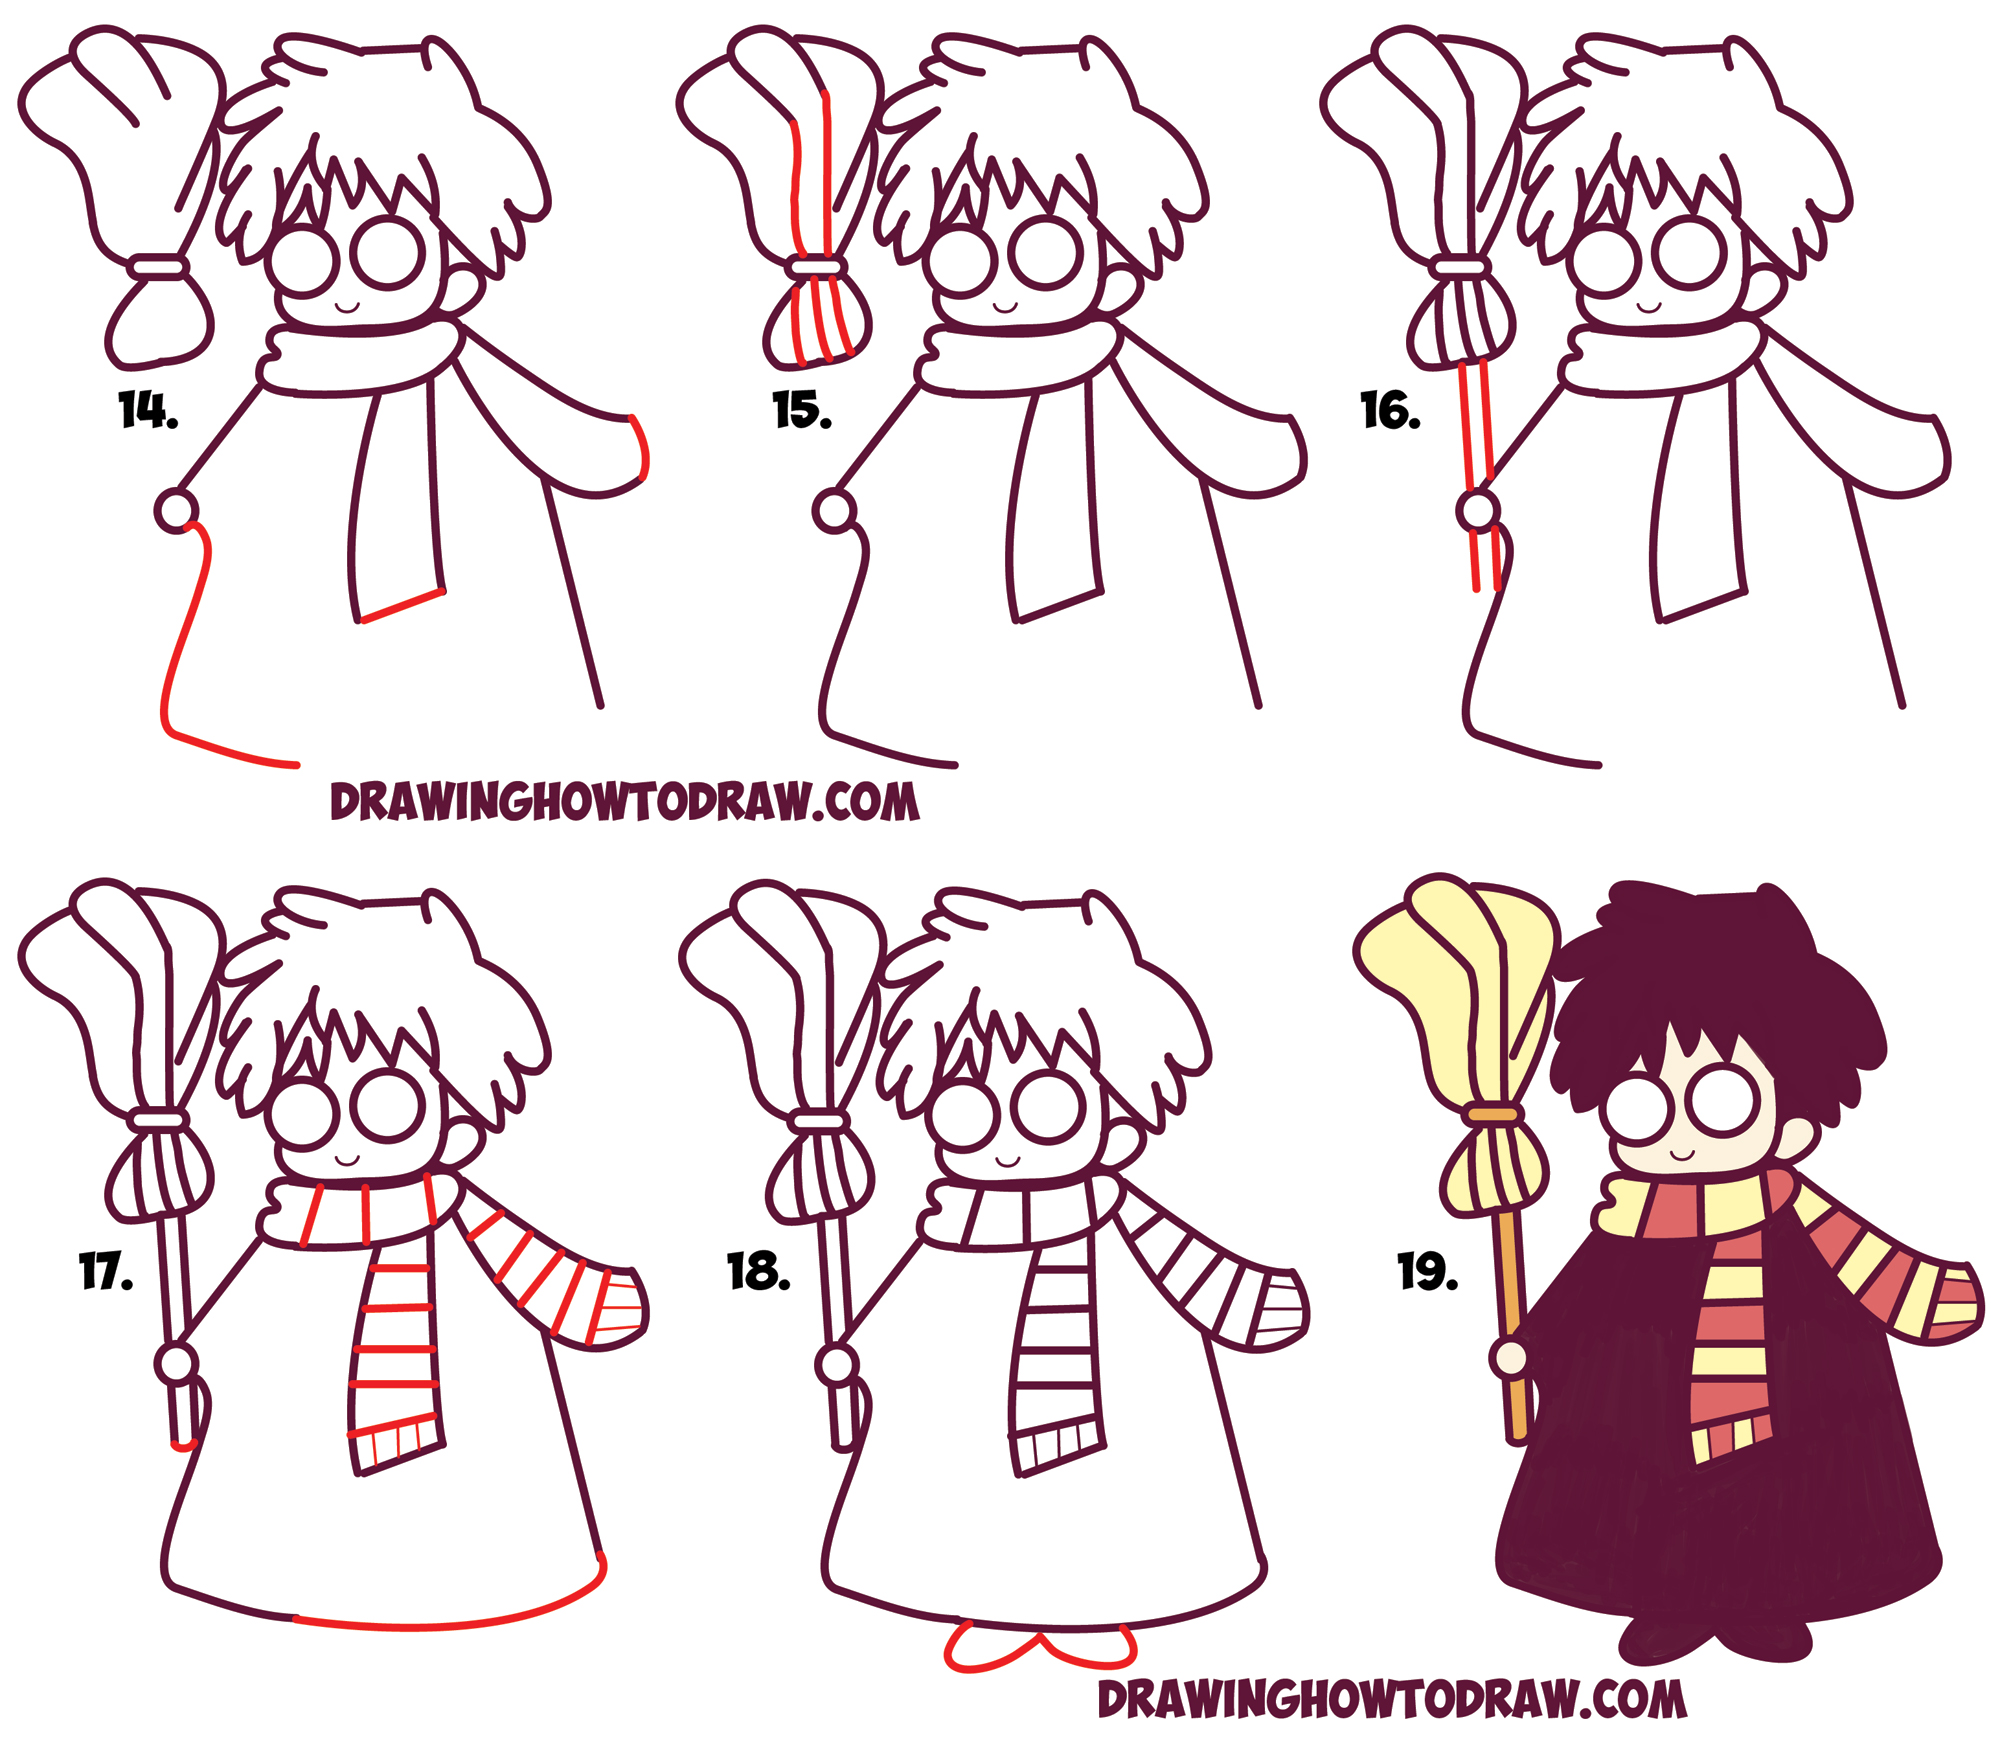 How To Draw Ron Weasley Anime Ron Weasley Harry Potter Step by Step  Drawing Guide by Dawn  DragoArt